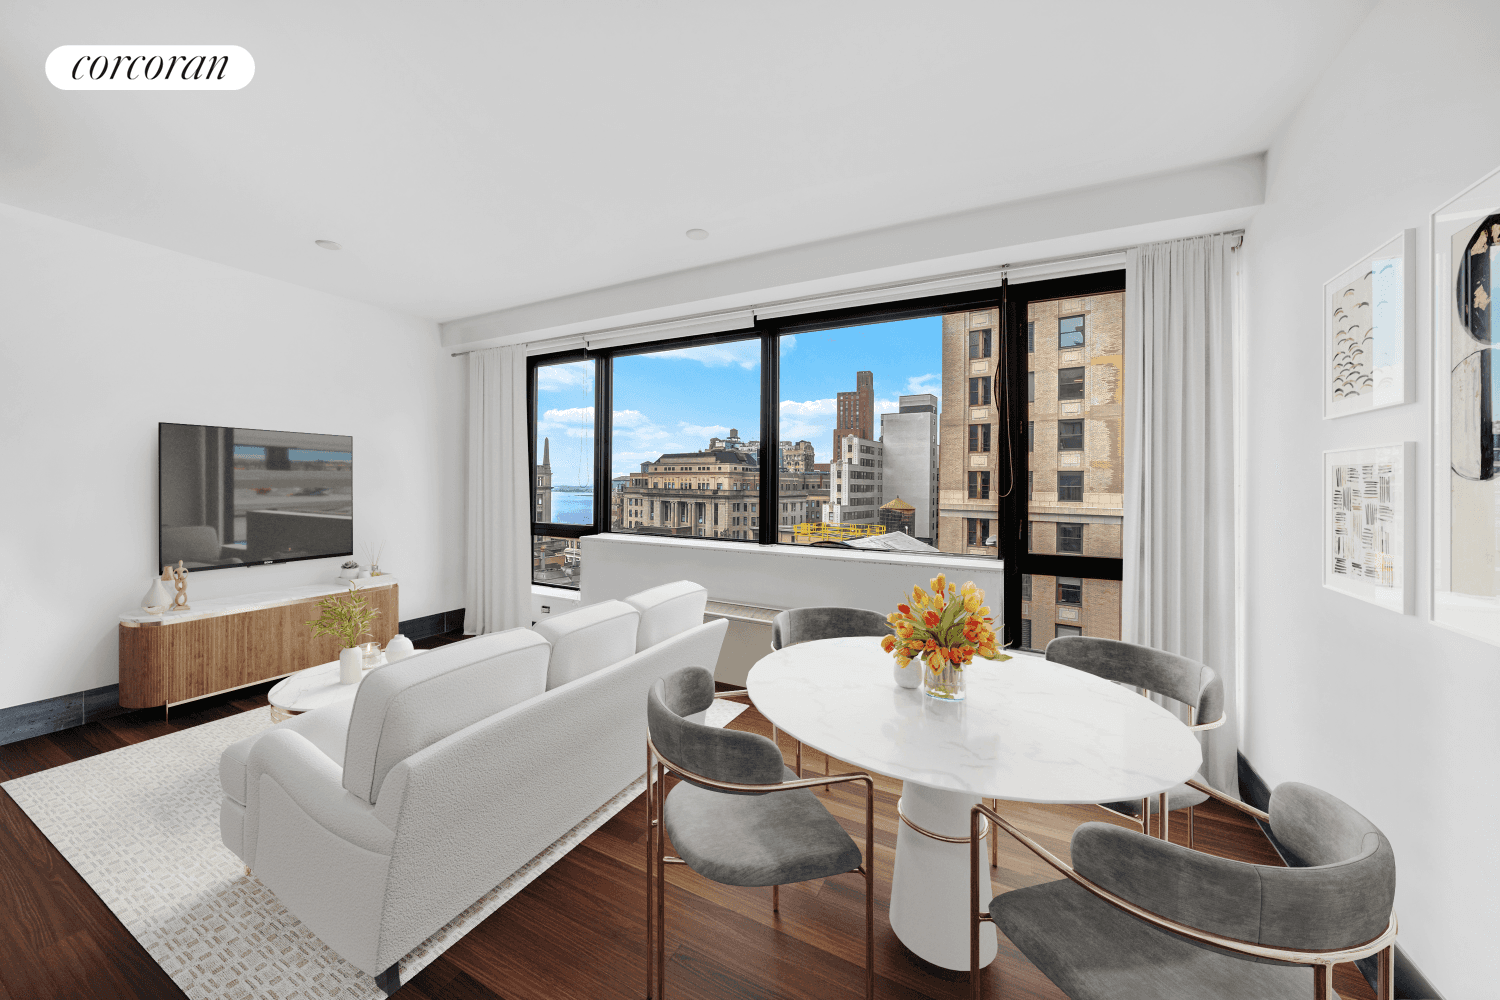 Welcome home to this tranquil corner penthouse offering stunning water views and an abundance of natural light.